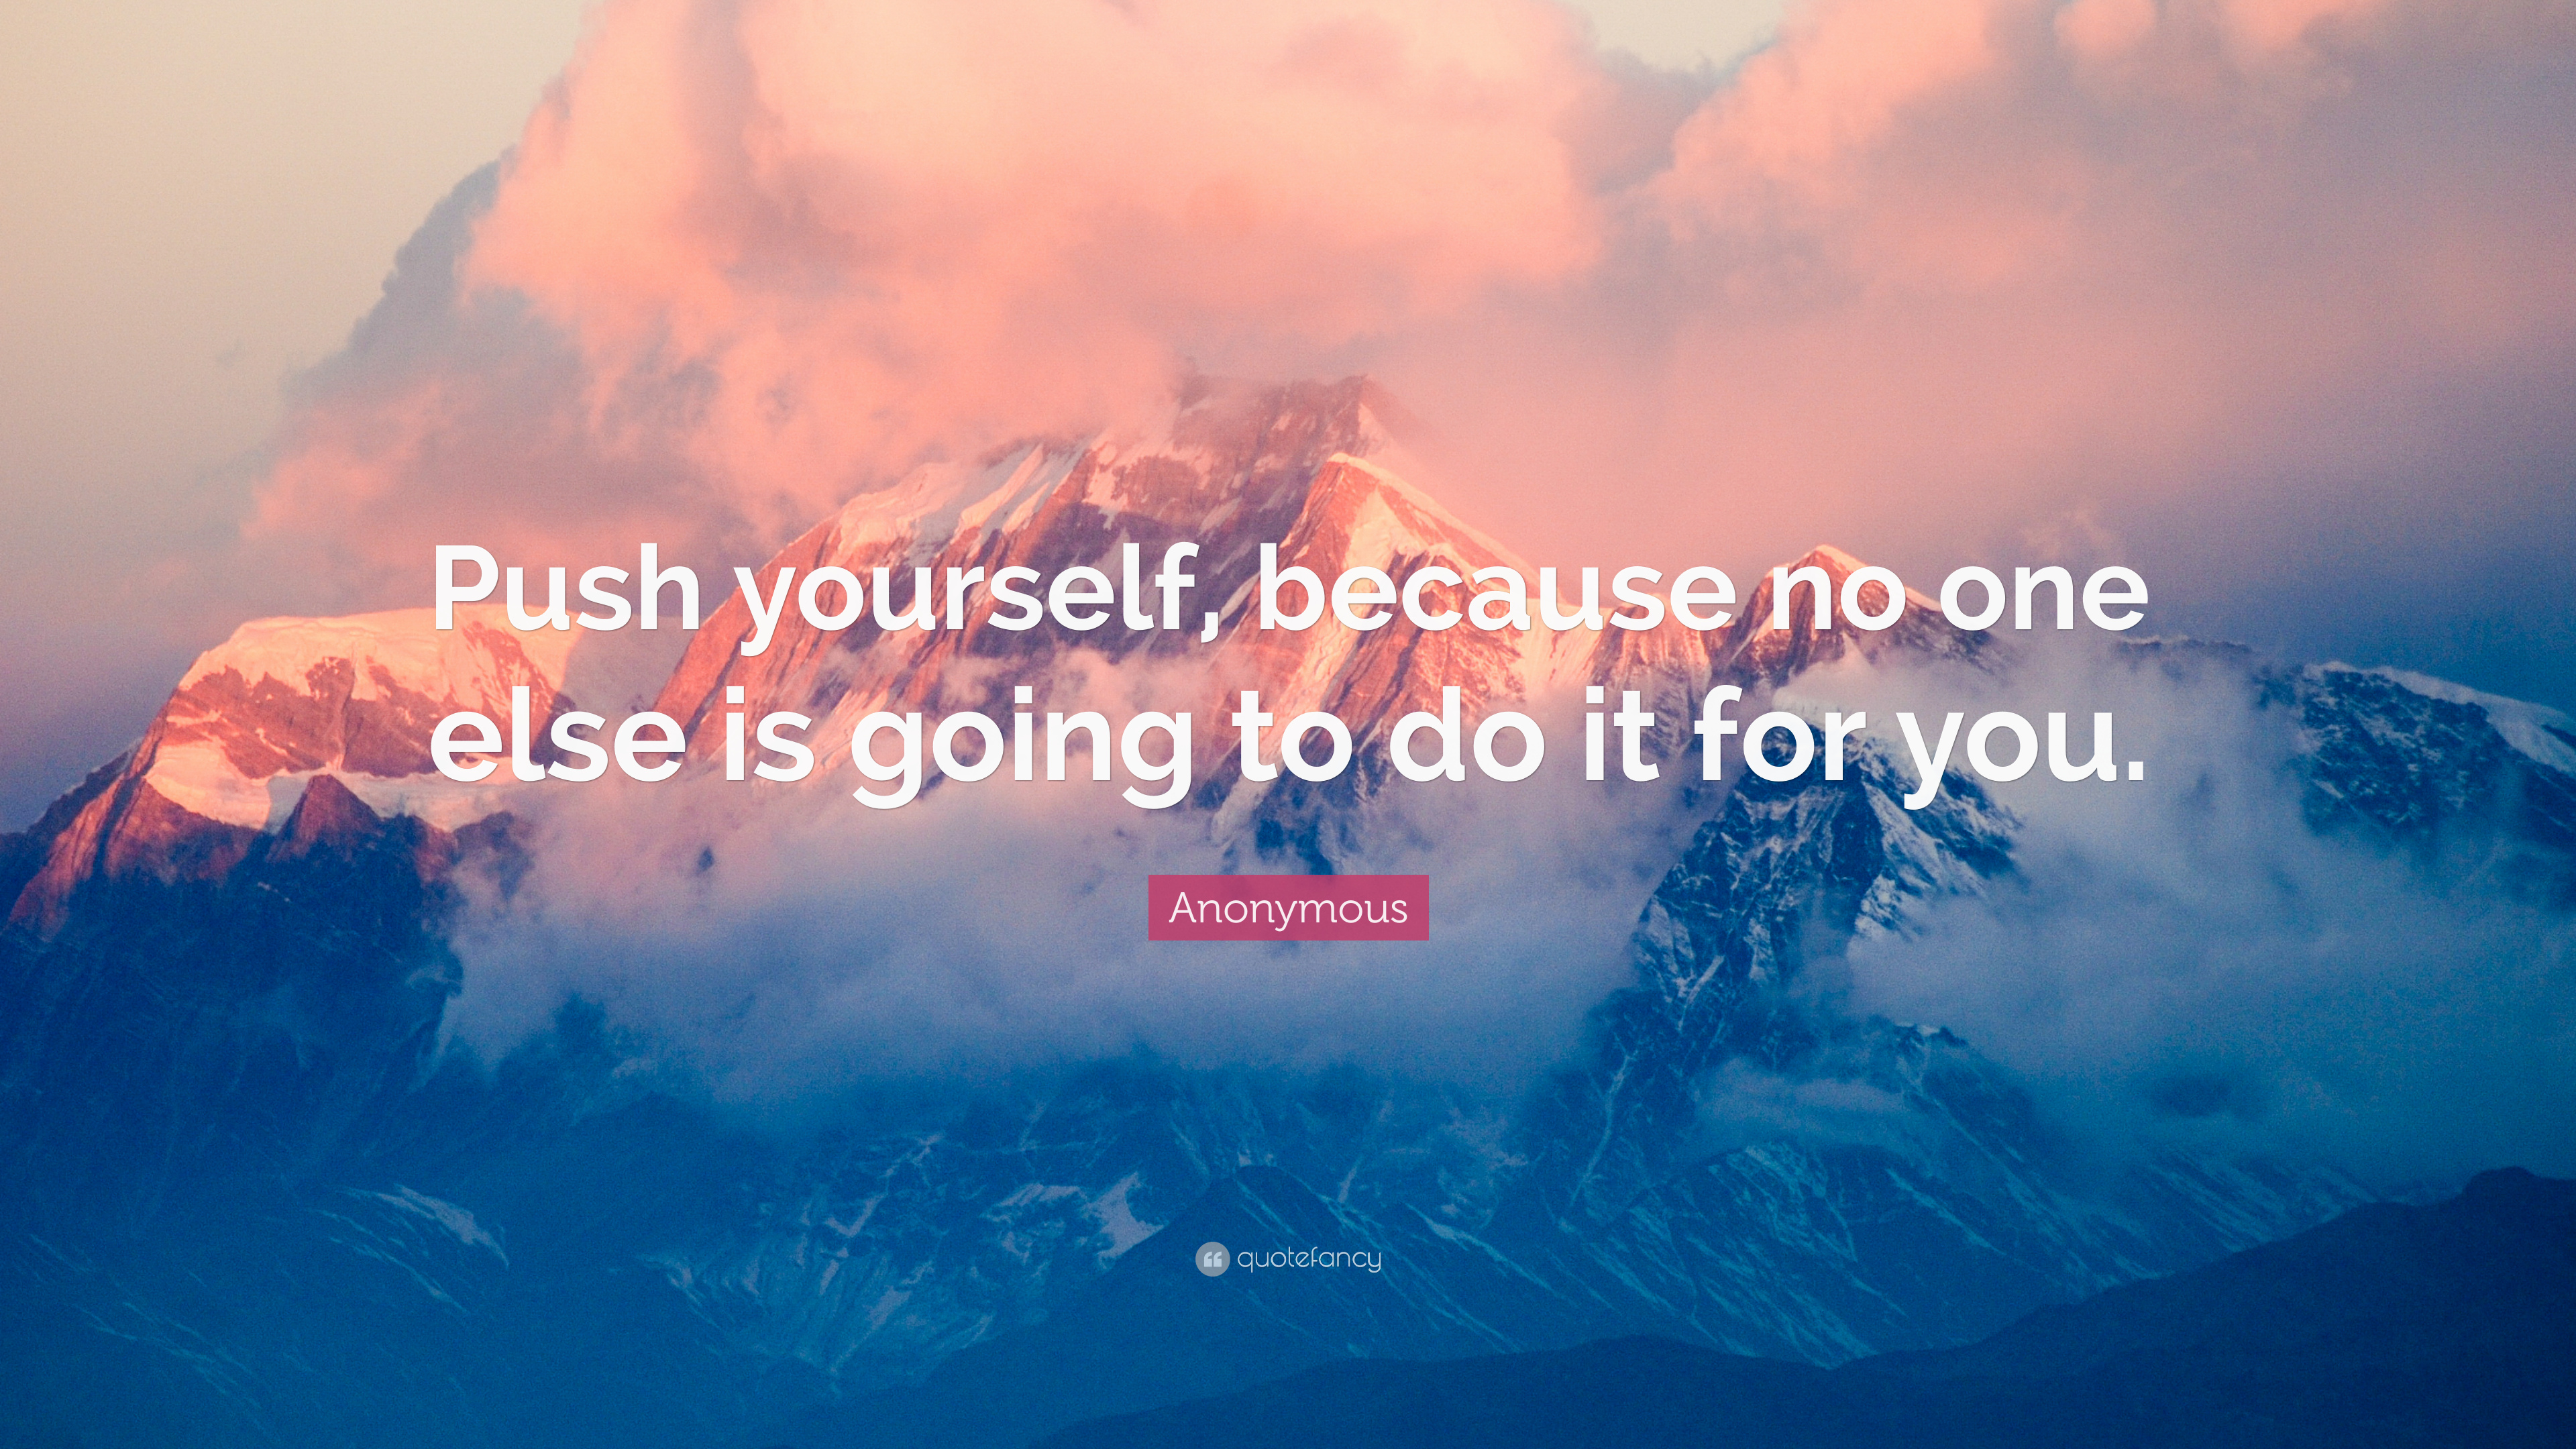 Anonymous Quote: “Push yourself, because no one else is going to do it for you.”